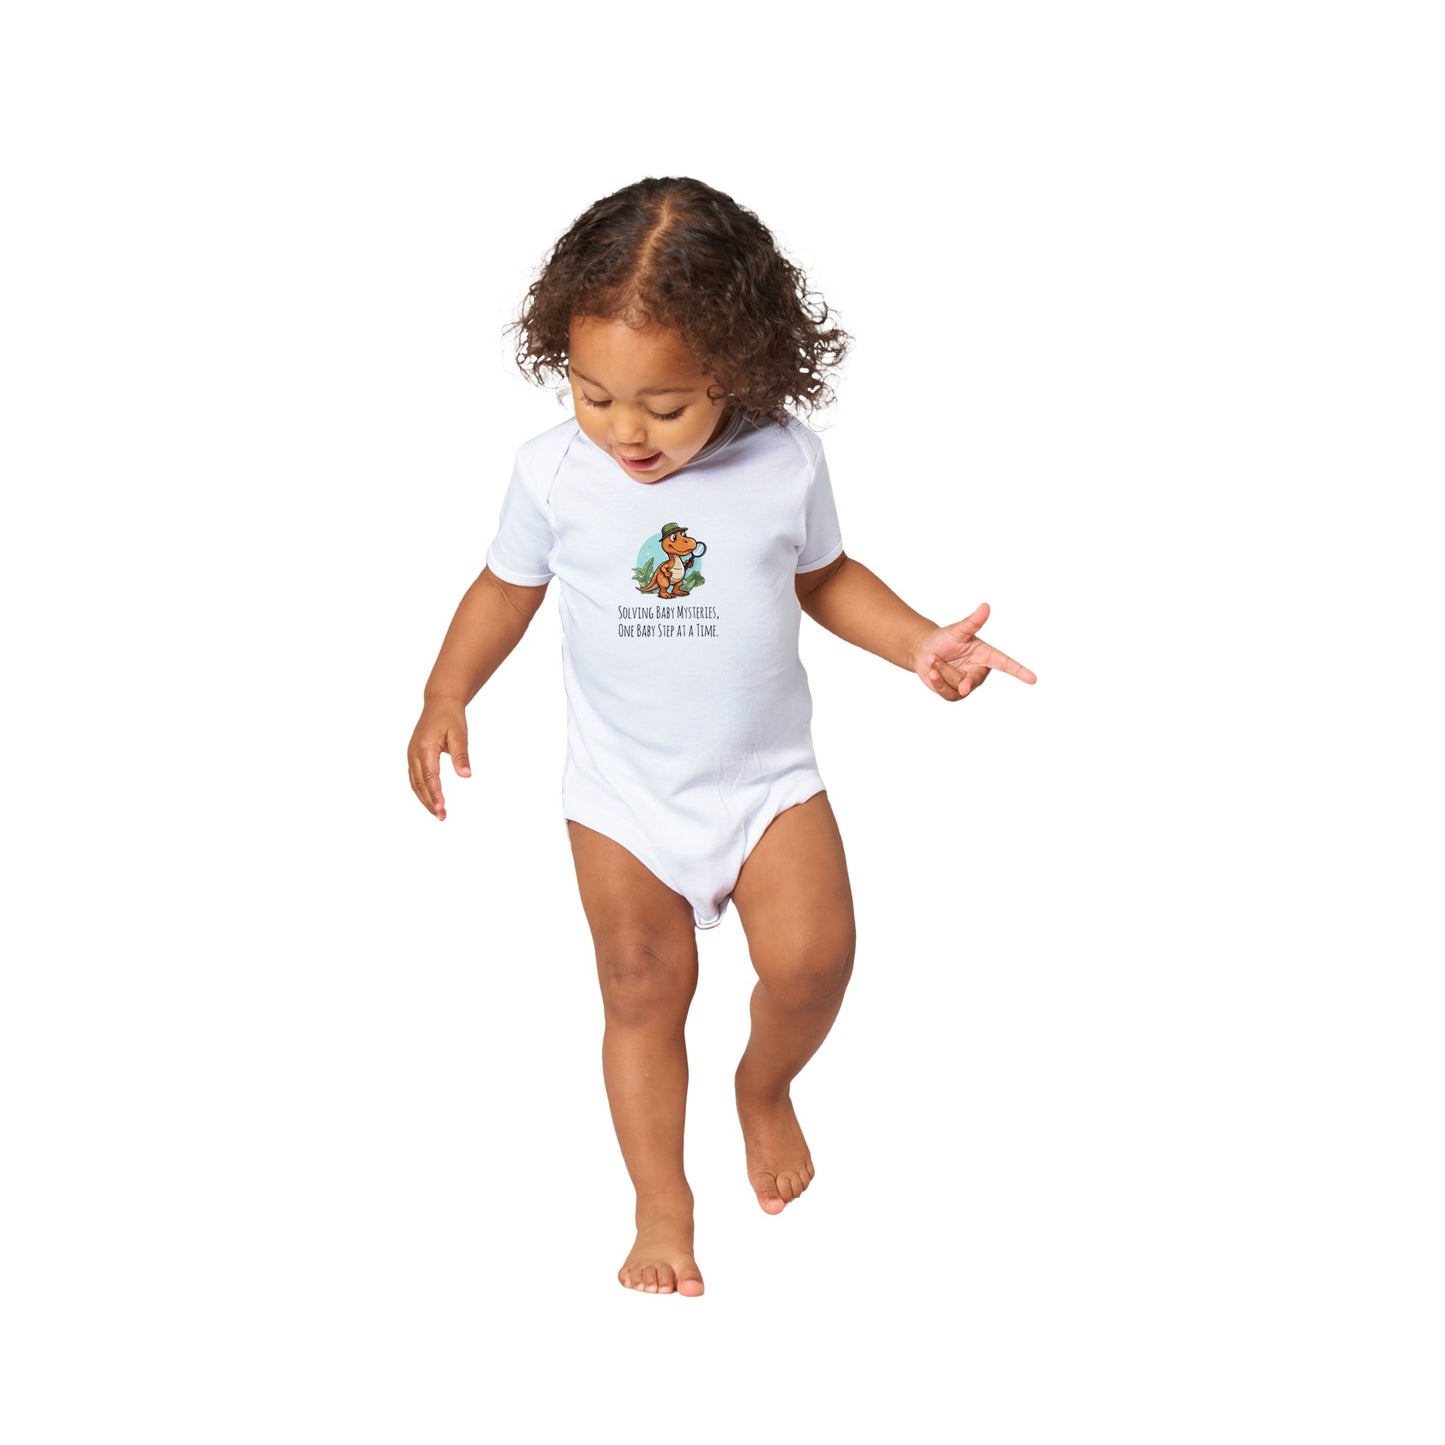 Classic Baby Short Sleeve Bodysuit - Solving Baby Mysteries, One Baby Step At A Time.